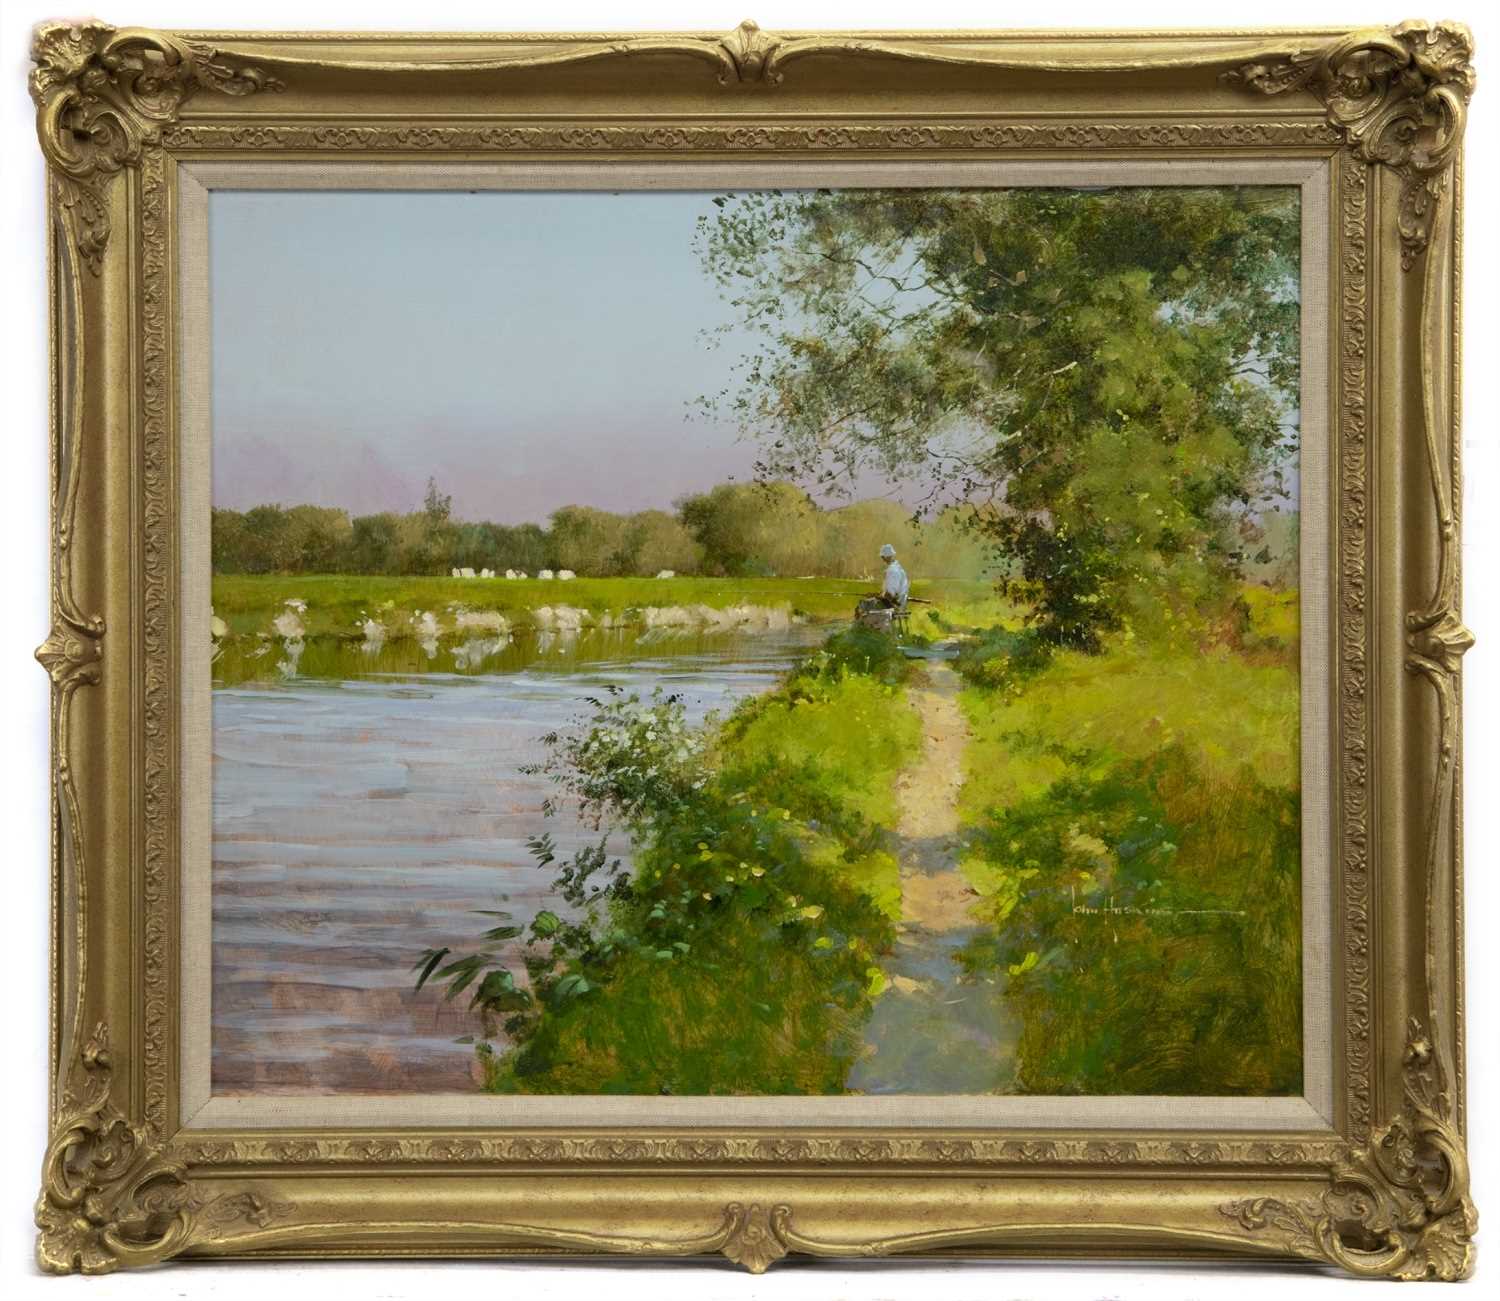 Lot 504 - FISHING ON THE RIVER OUSE, AN OIL BY JOHN HASKINS